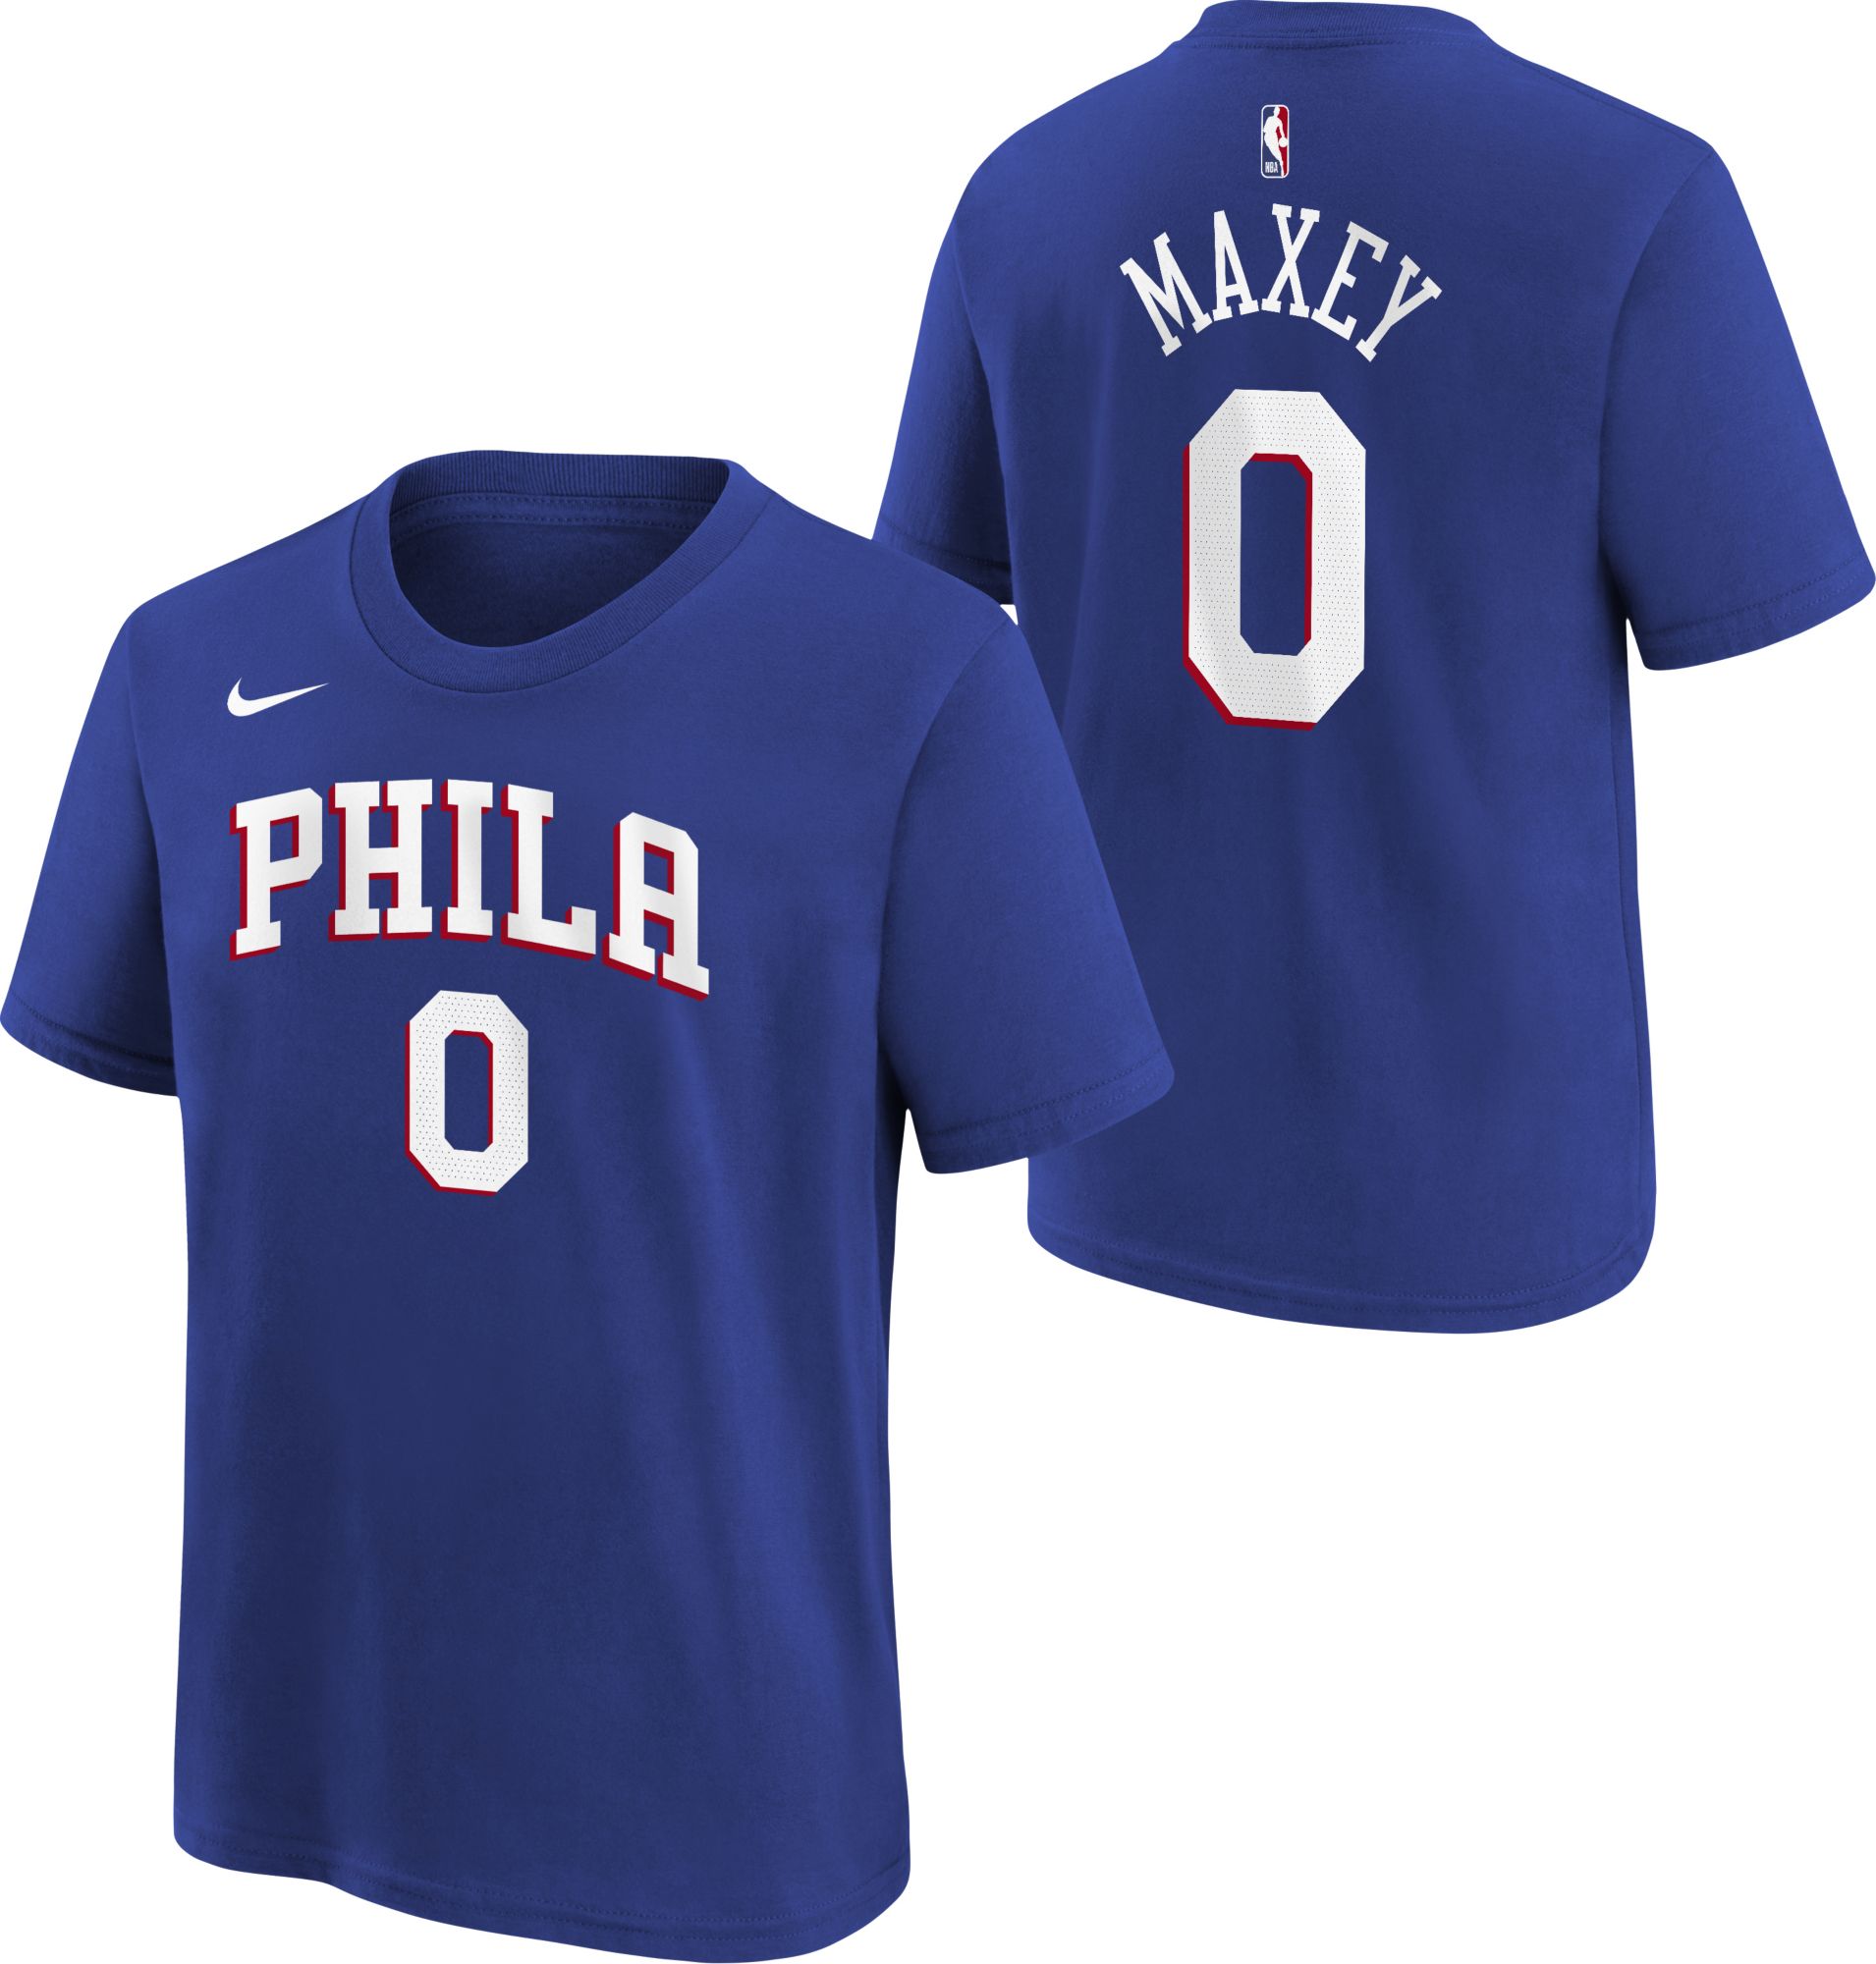 Tyrese Maxey Jerseys, Tyrese Maxey Shirts, Apparel, Tyrese Maxey Gear